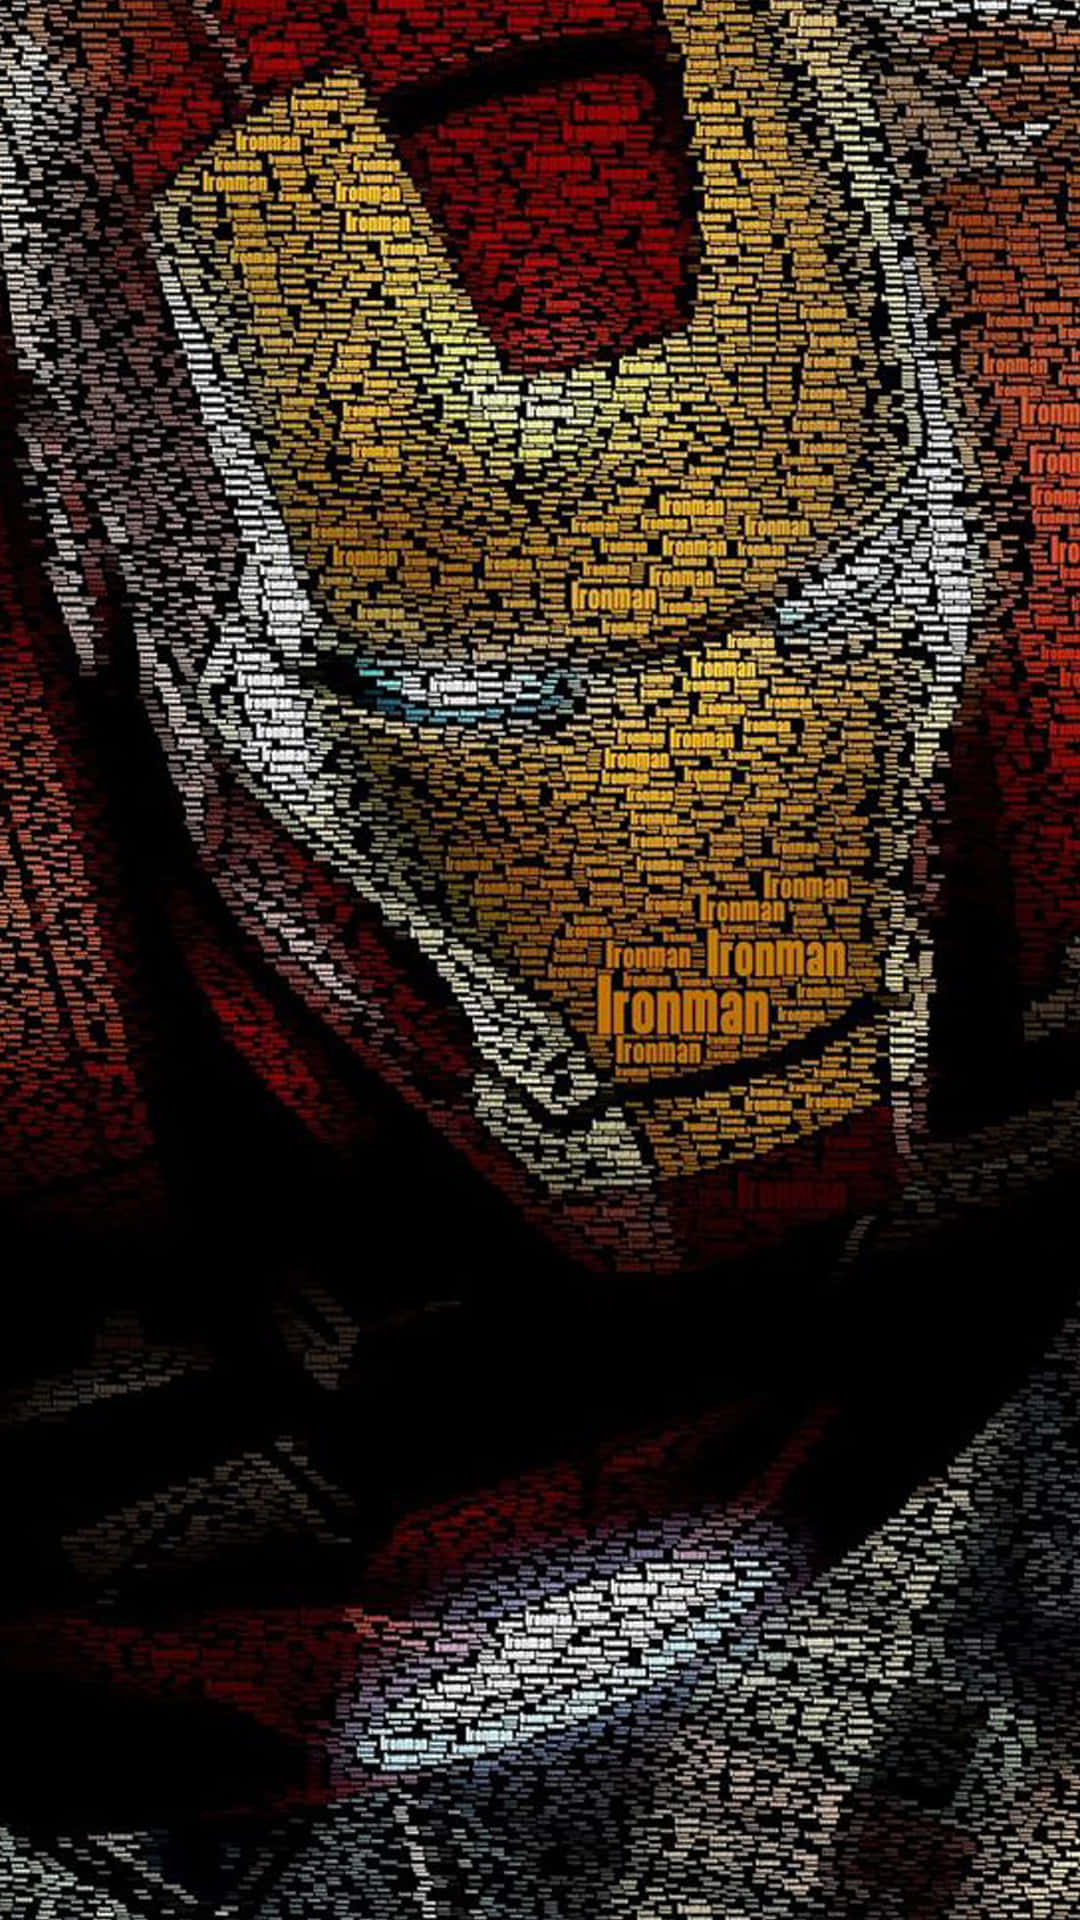 Showcase Your Style with Cool Iron Man Iphone Wallpaper